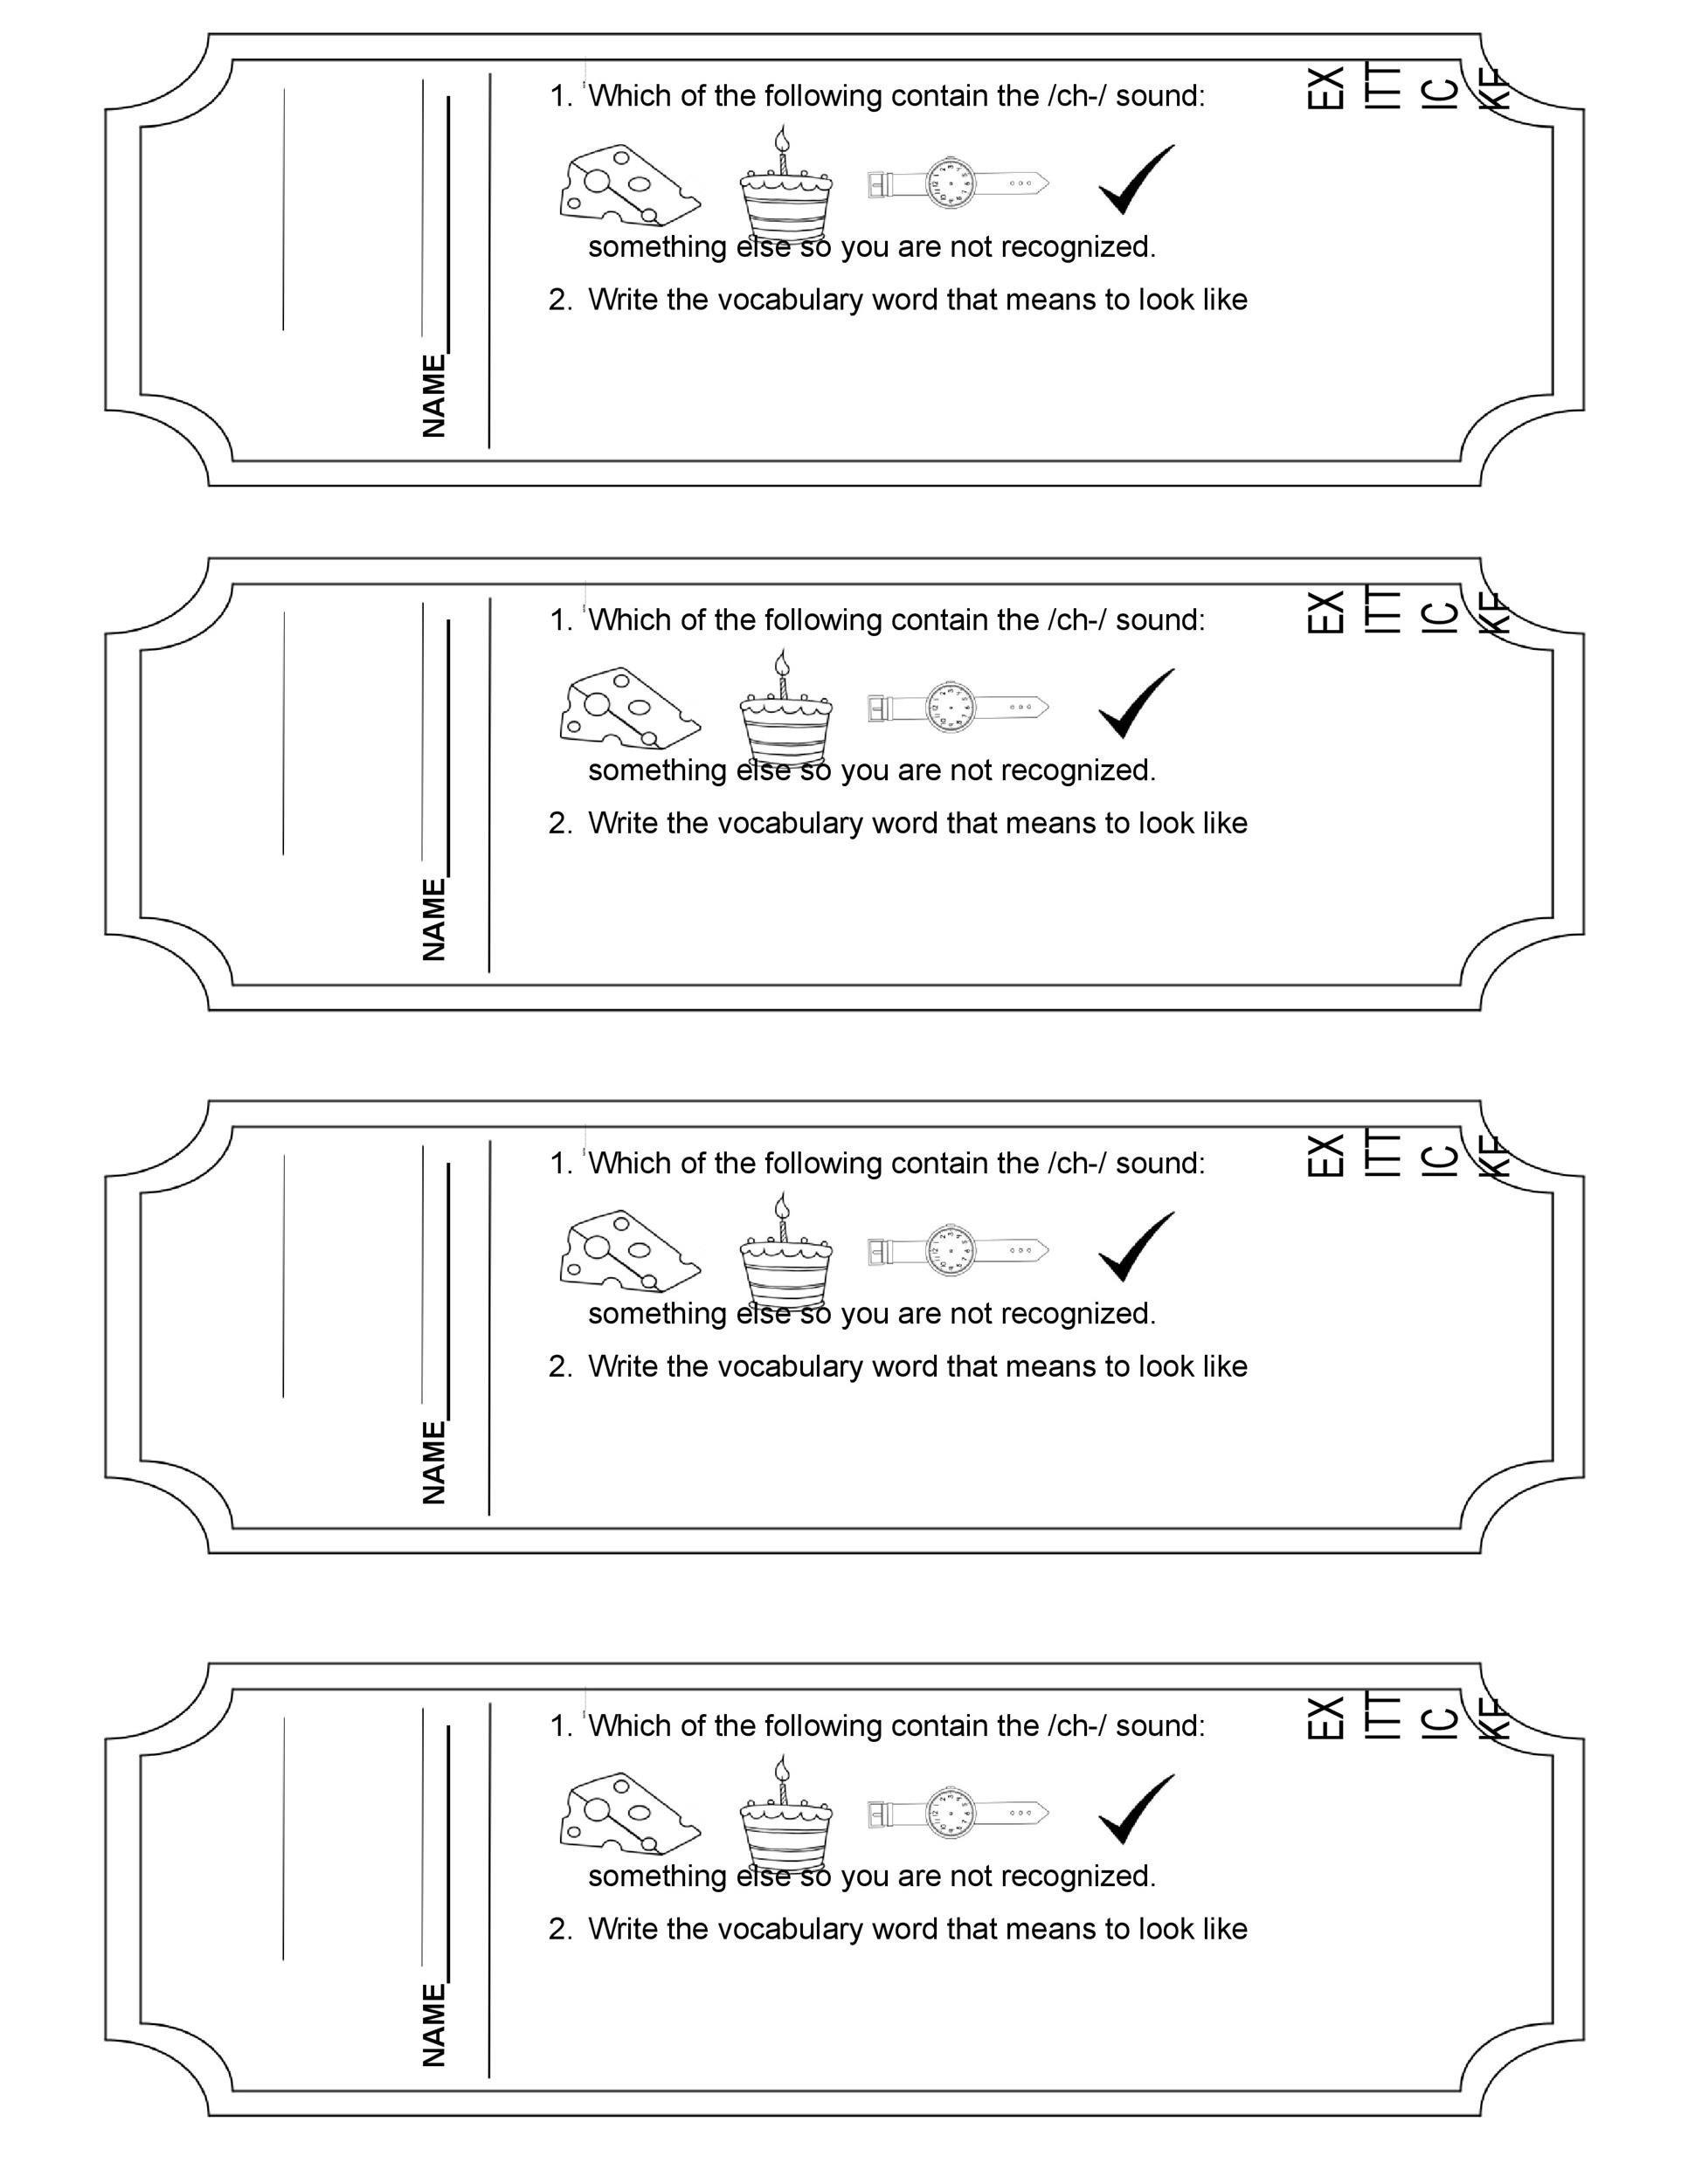 24-printable-exit-ticket-templates-word-pdf-template-lab